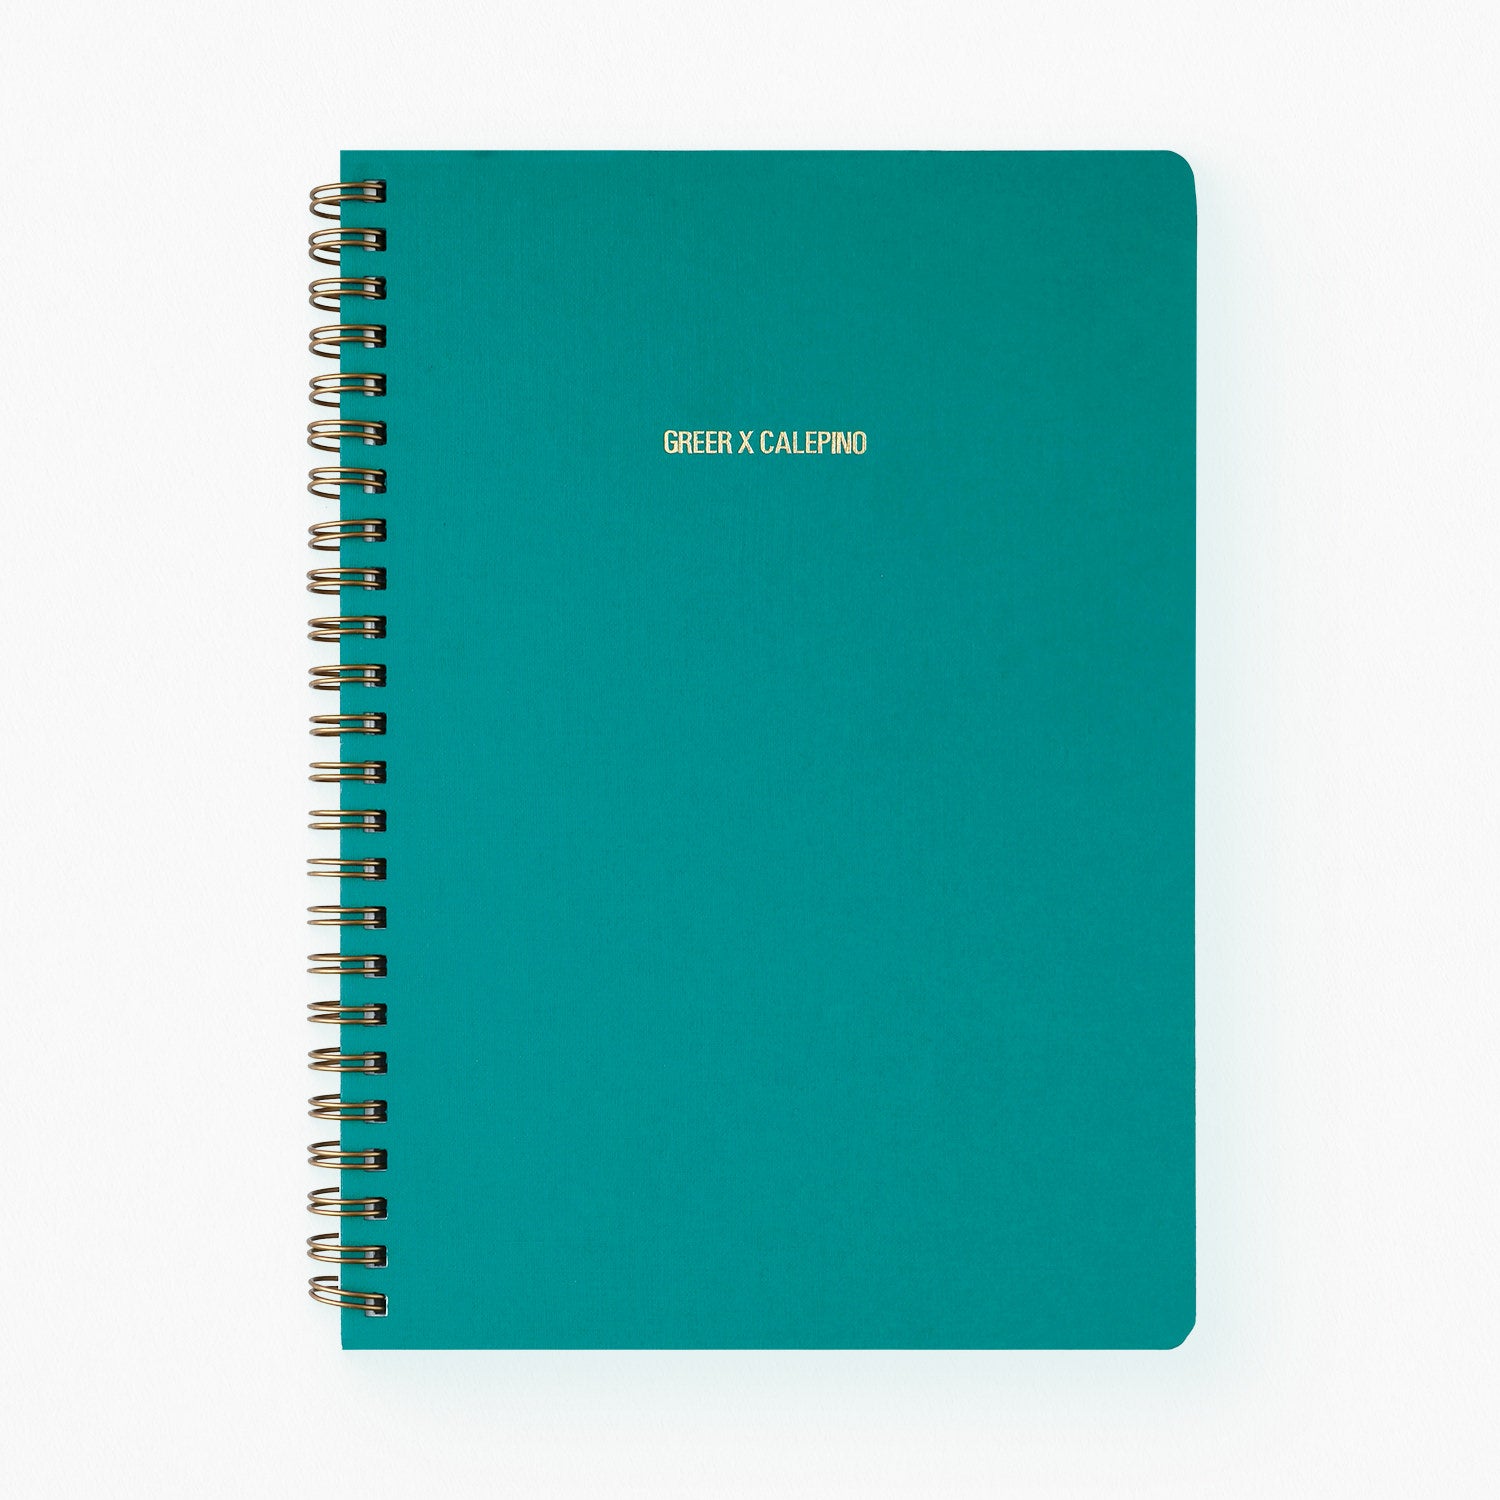 Greer x Calepino Dot Grid Notebook Turquoise